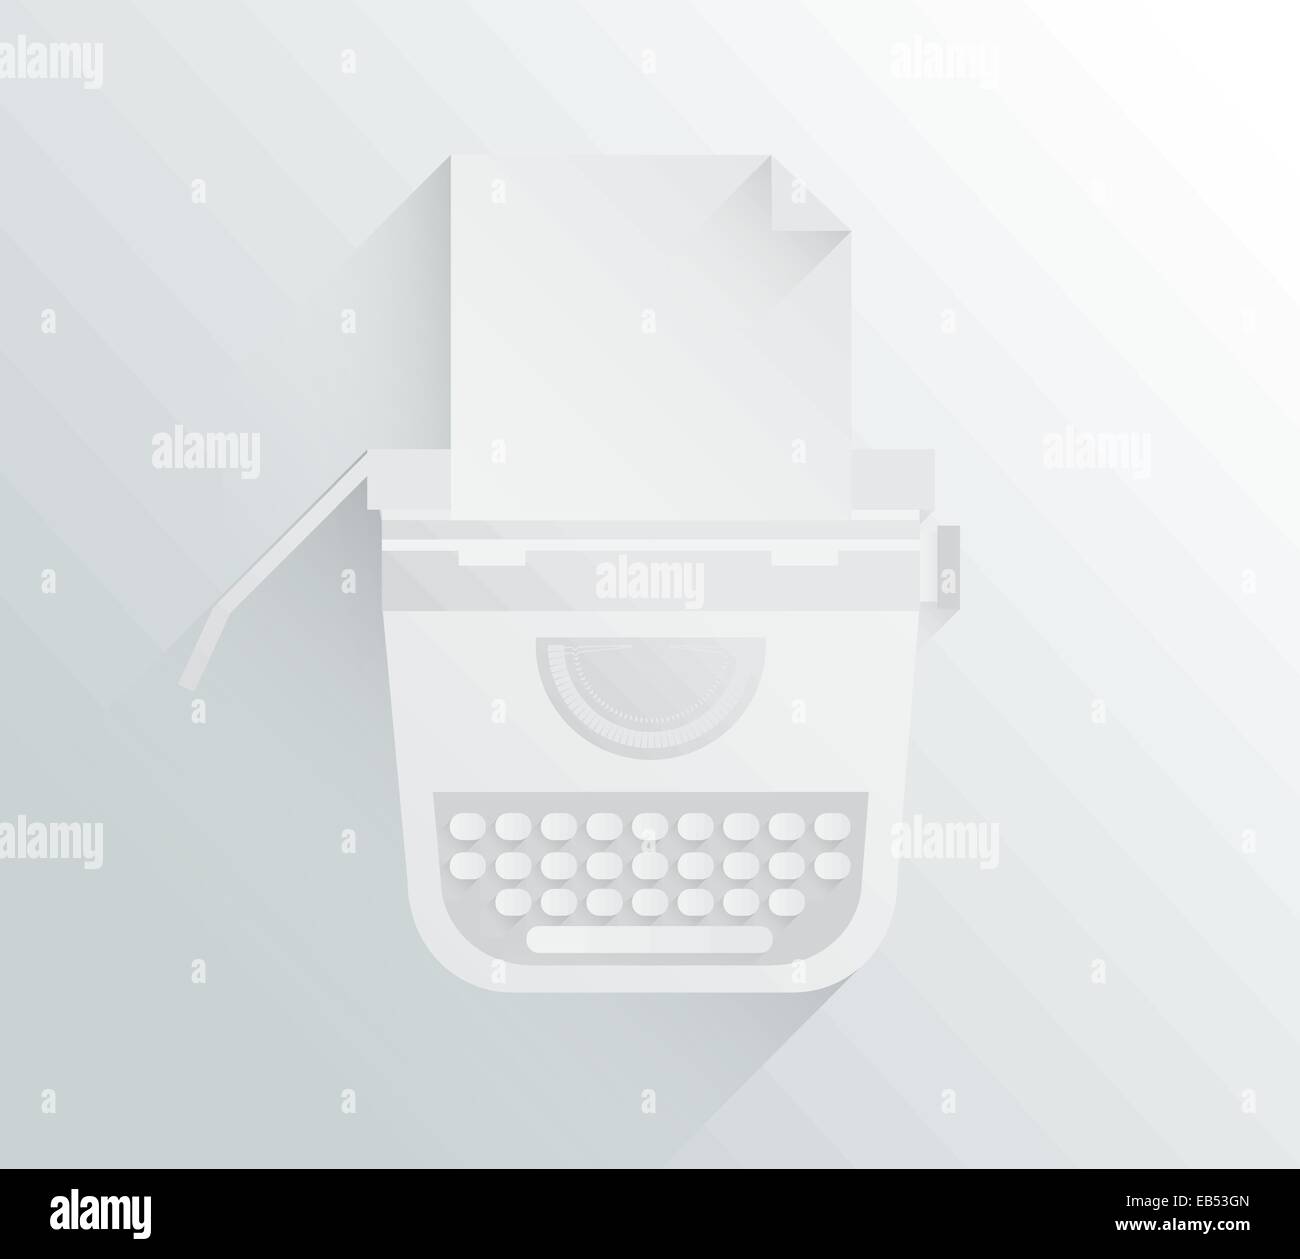 White and grey typewriter in simple design Stock Vector